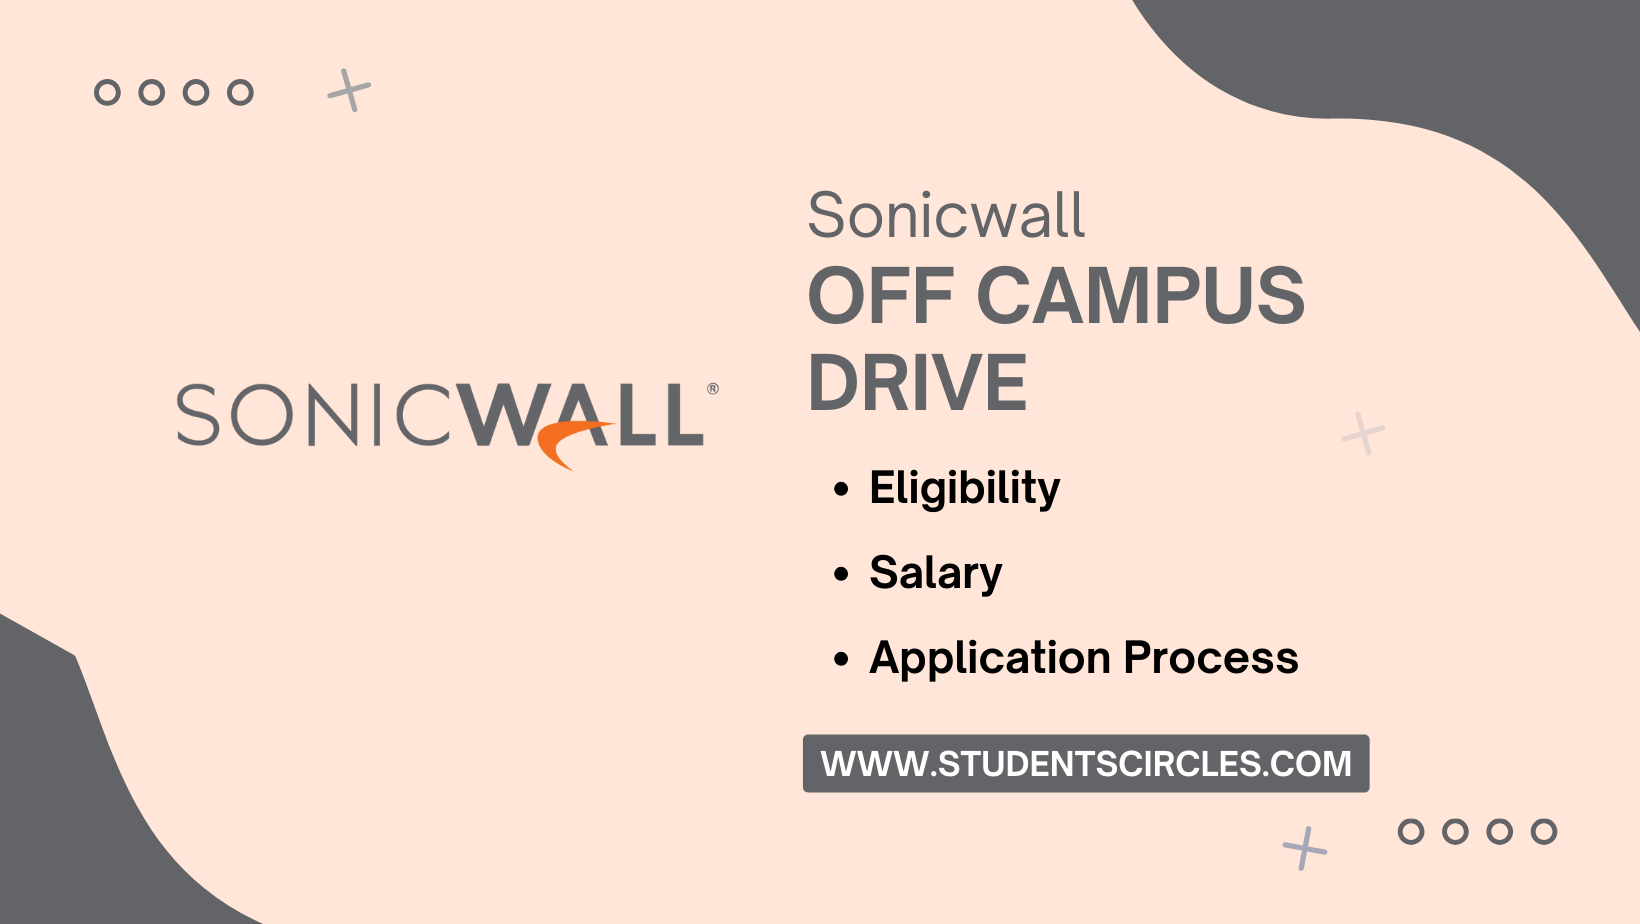 Sonicwall Off Campus Drive